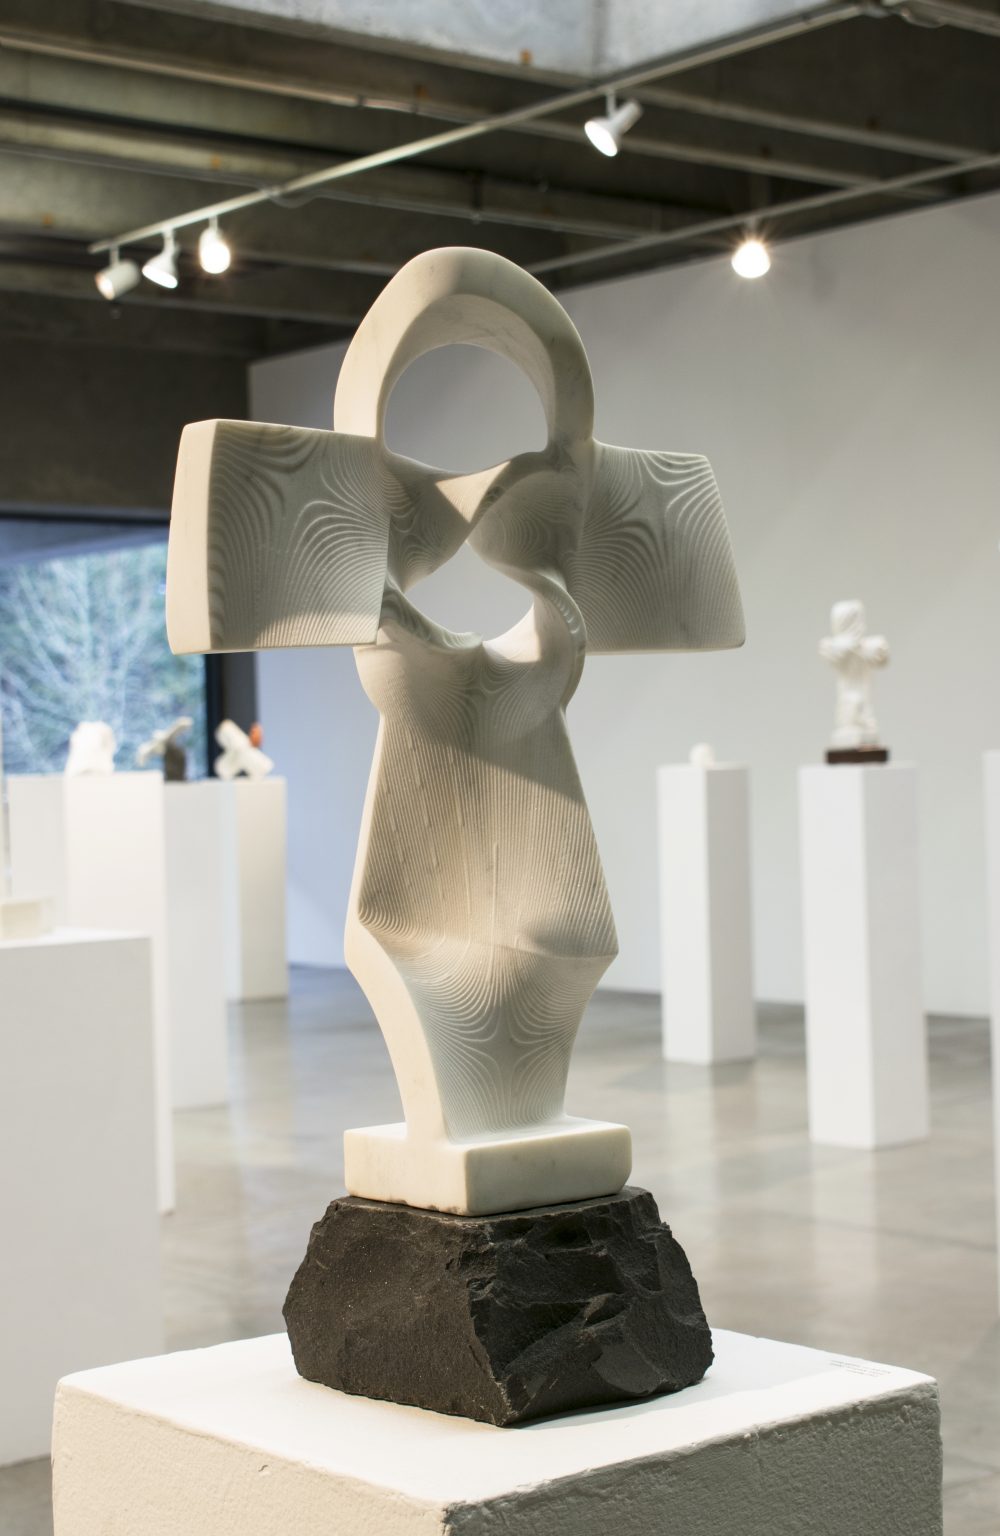 Marble sculpture in shape of a twisted cross, on a base of dark basalt, on pedestal, with other sculptures on pedestals in background.